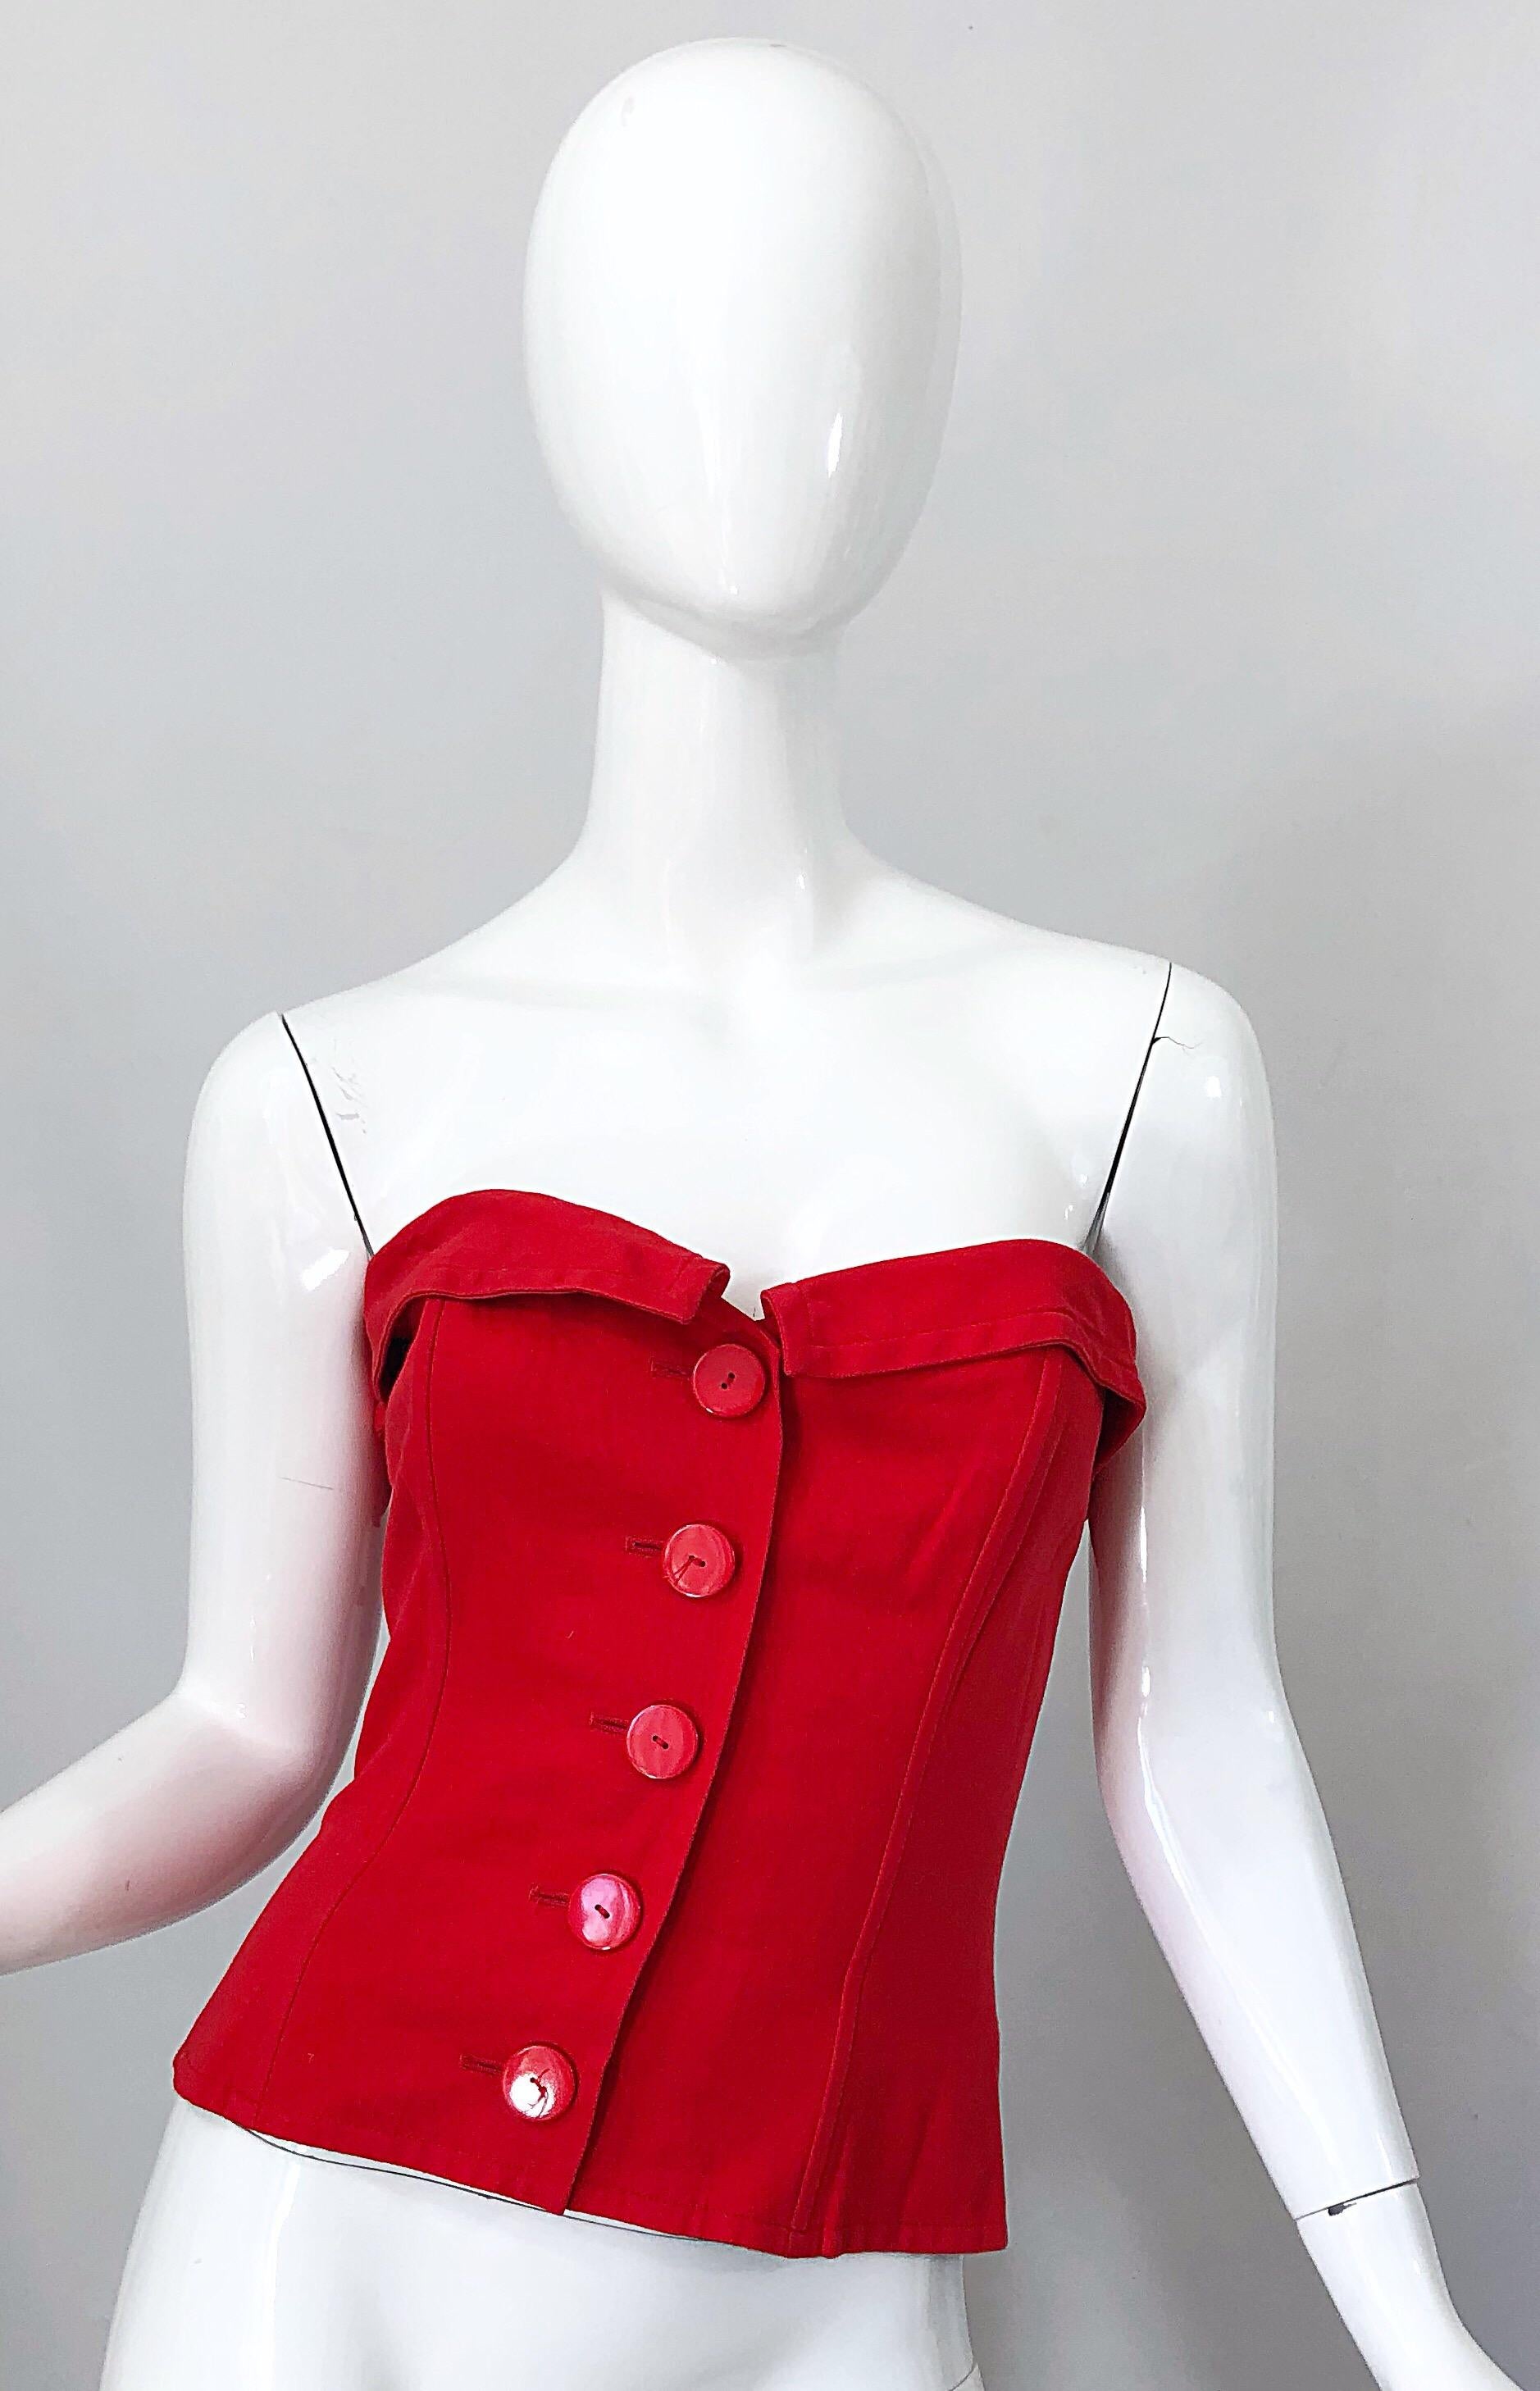 Beautiful vintage late 80s YVES SAINT LAURENT YSL Lipstick Red Strapless Cotton Bustier Corset top! Features large red buttons up the front. Interior boning holds everything in place. Can easily be dressed up or down. Great with jeans, a mini skirt,